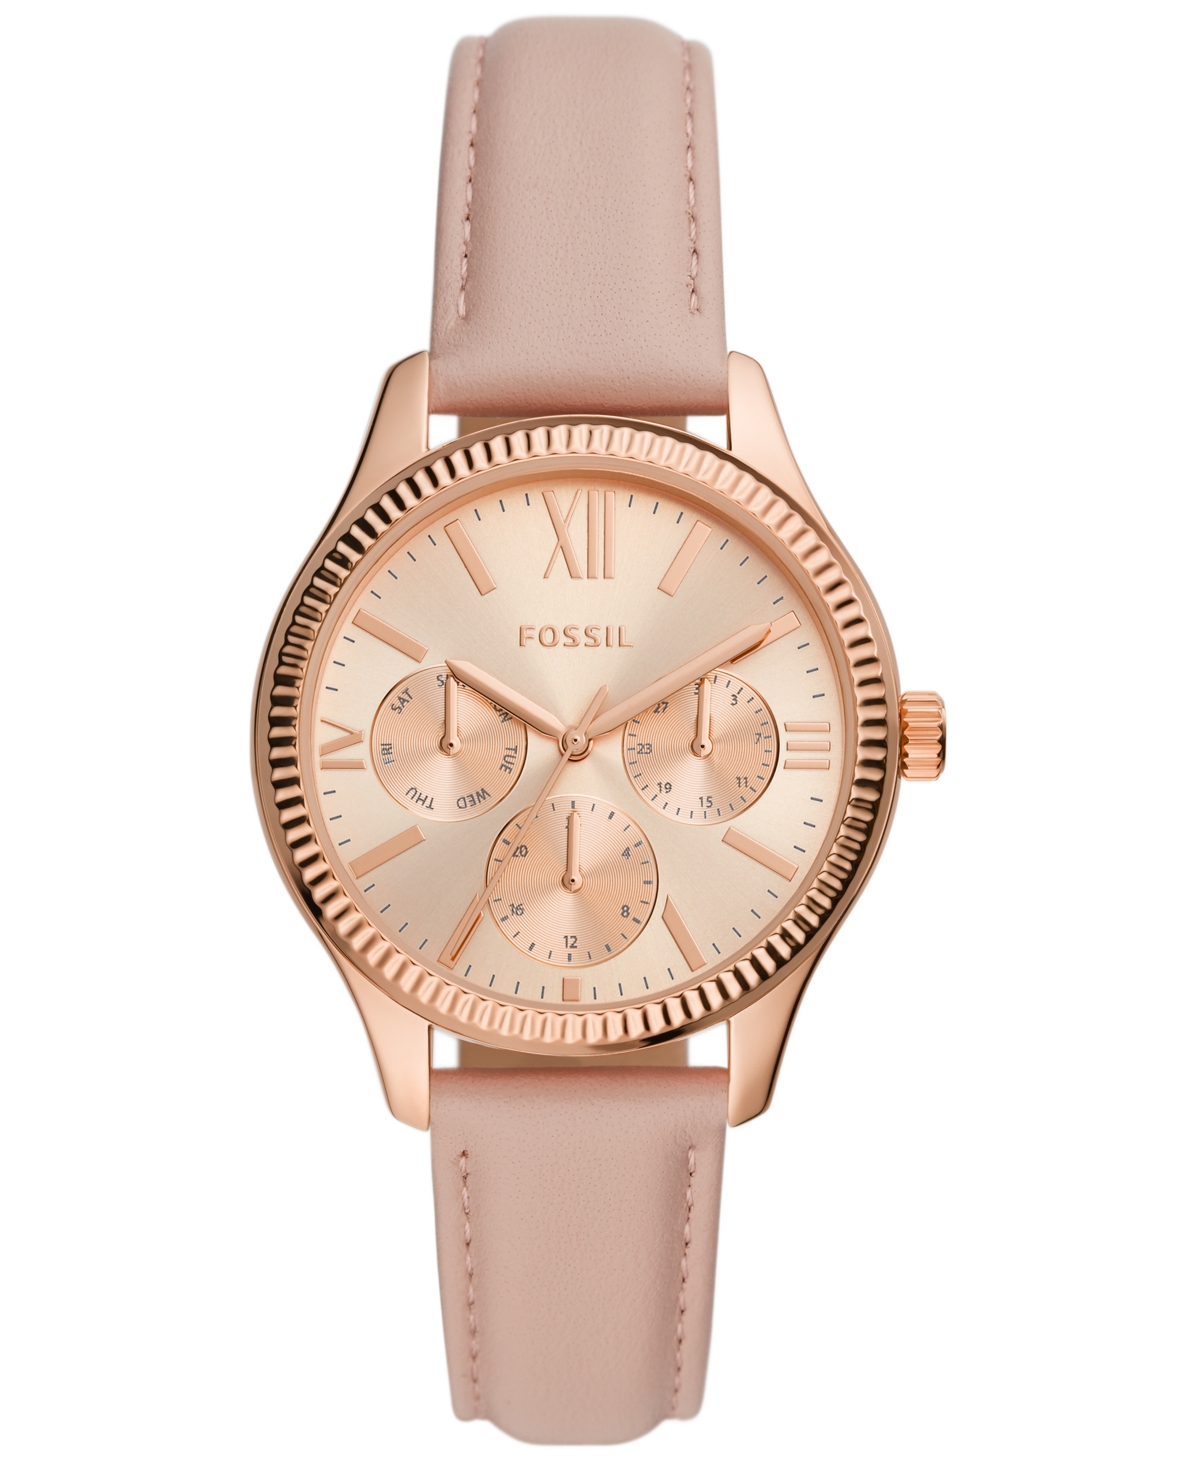 FOSSIL WOMEN'S RYE MULTIFUNCTION ROSE GOLD-TONE NUDE LEATHER WATCH, 36MM